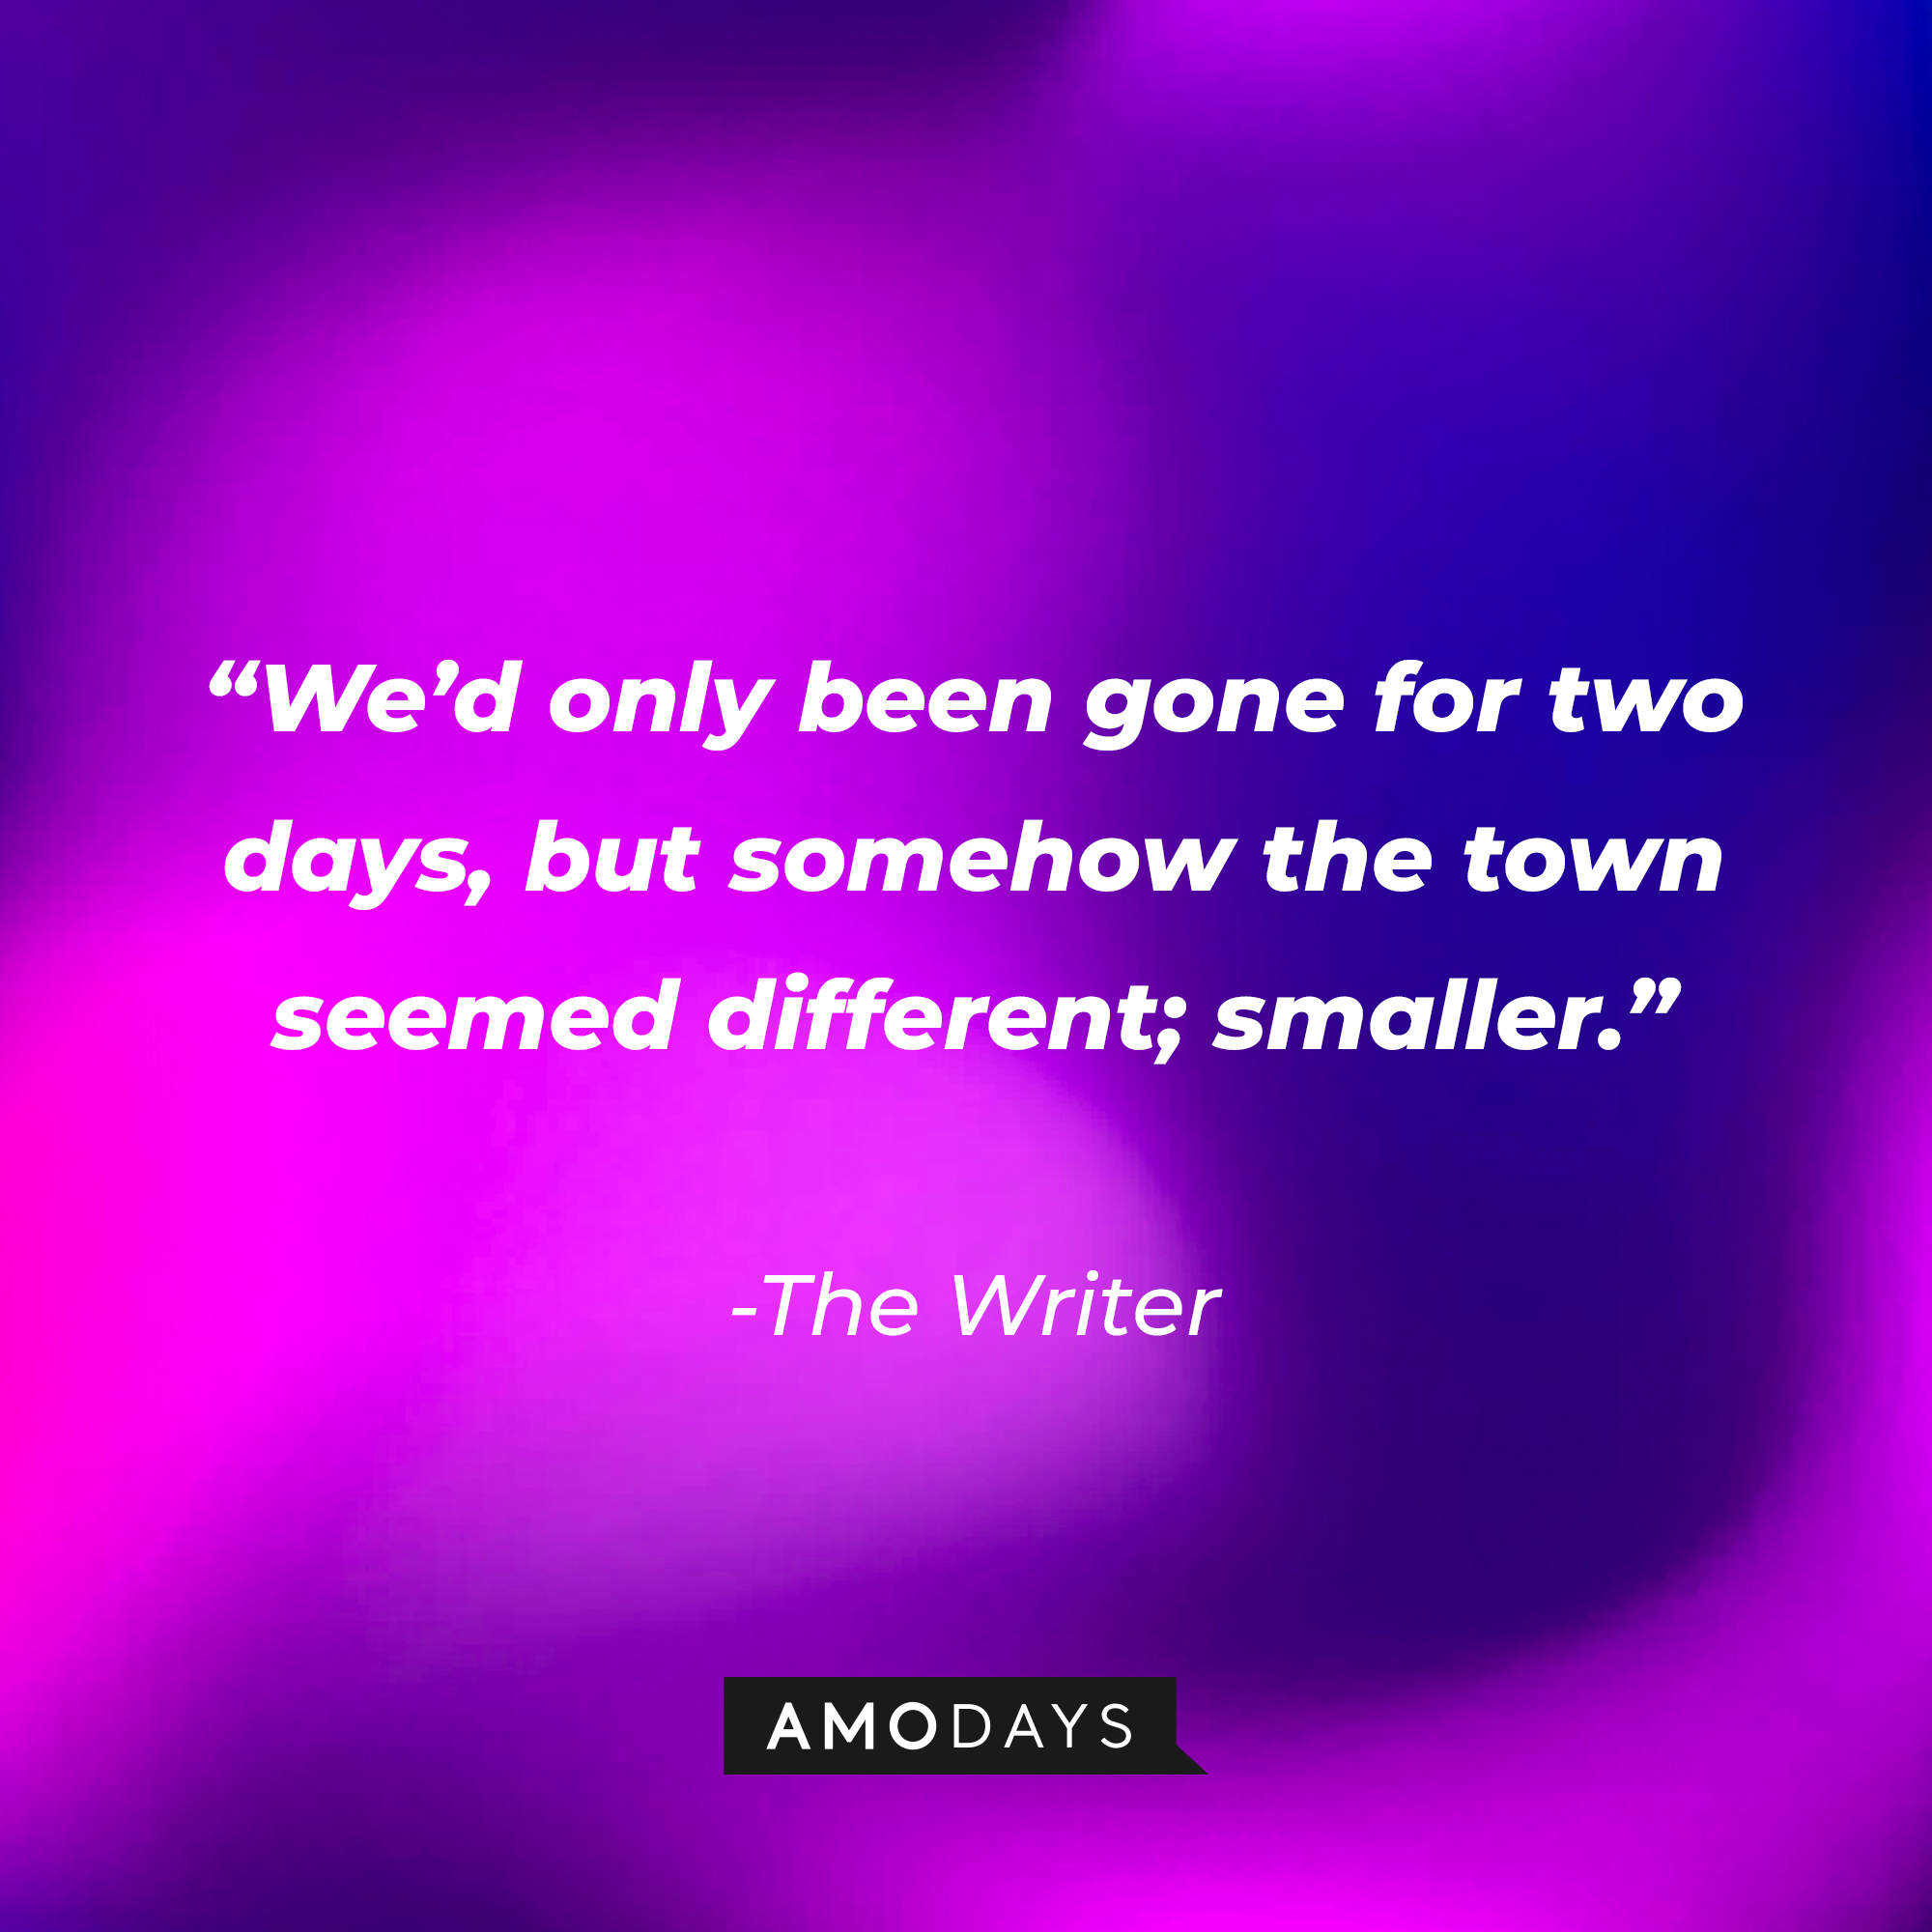 The Writer’s quote: “We’d only been gone for two days, but somehow the town seemed different; smaller.” | Source: AmoDays